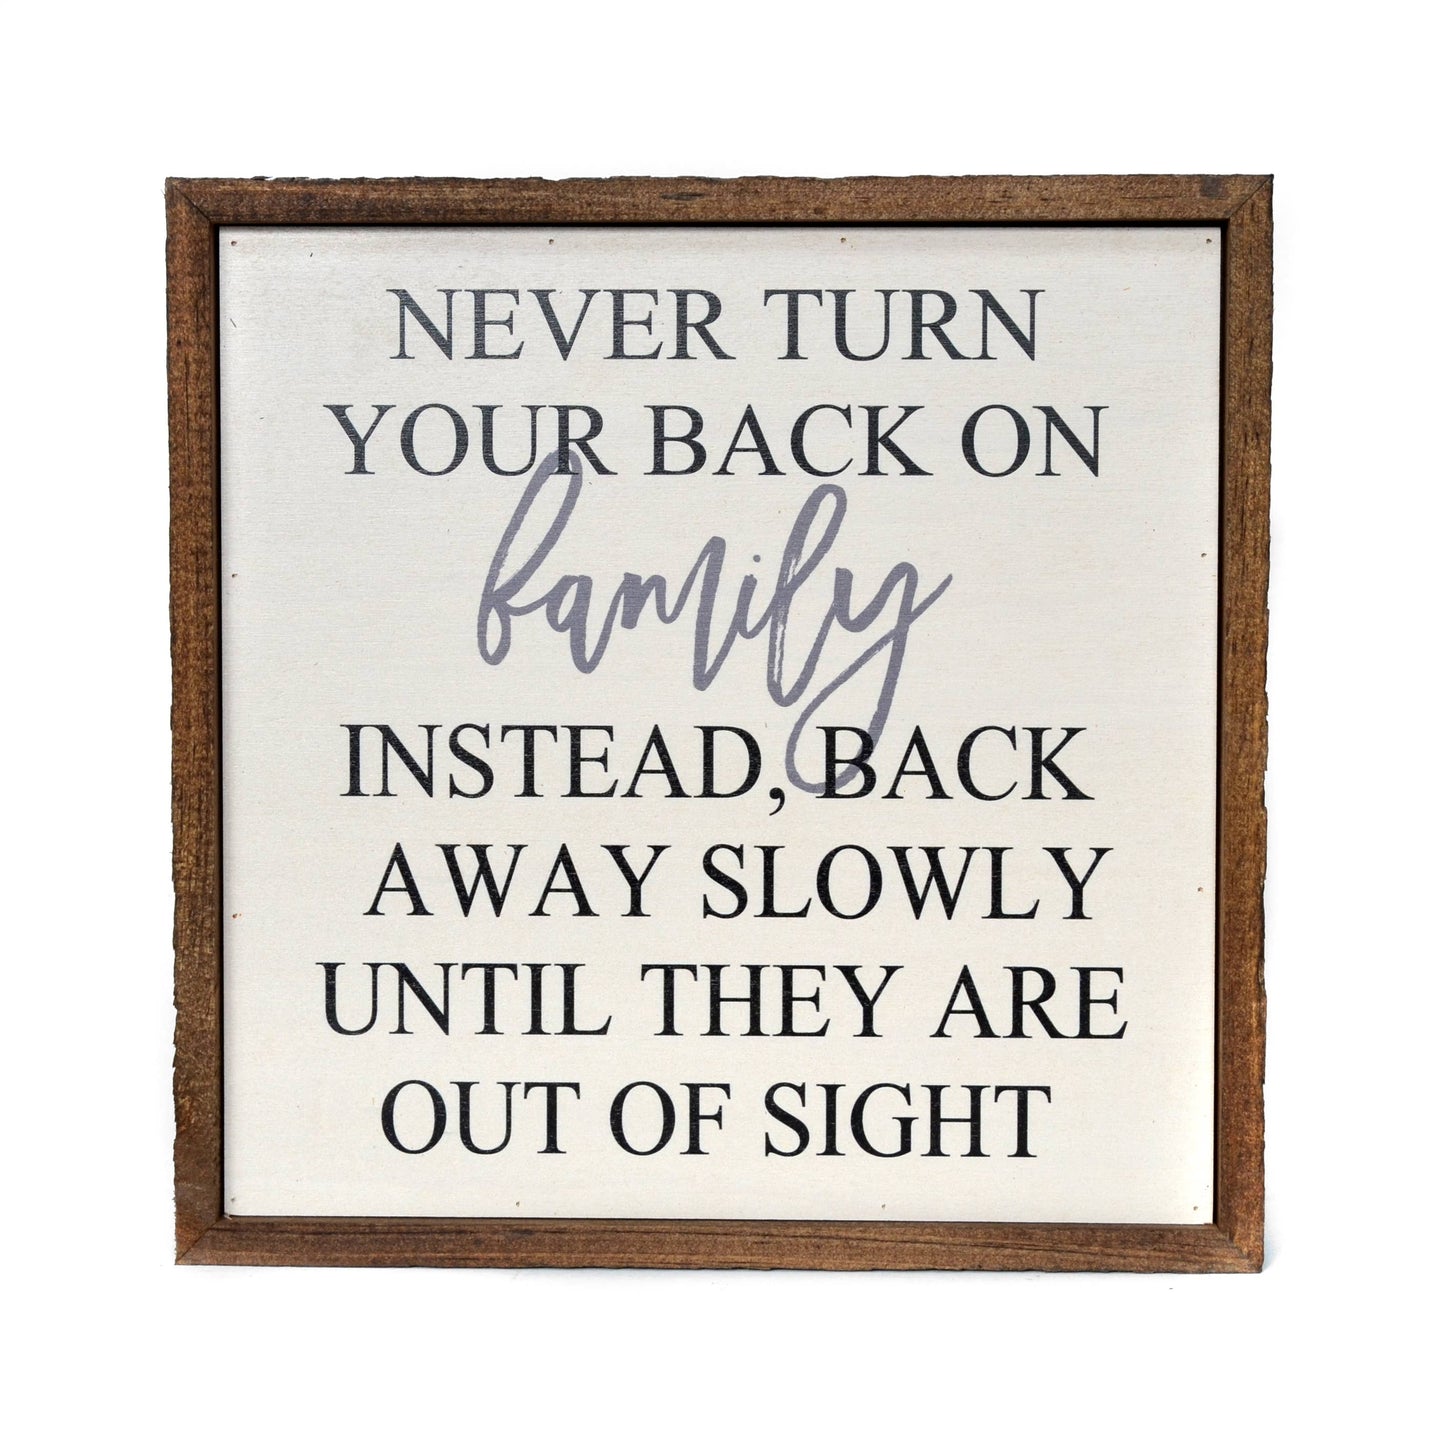 Never Turn Your Back On Family 10x10 Sign